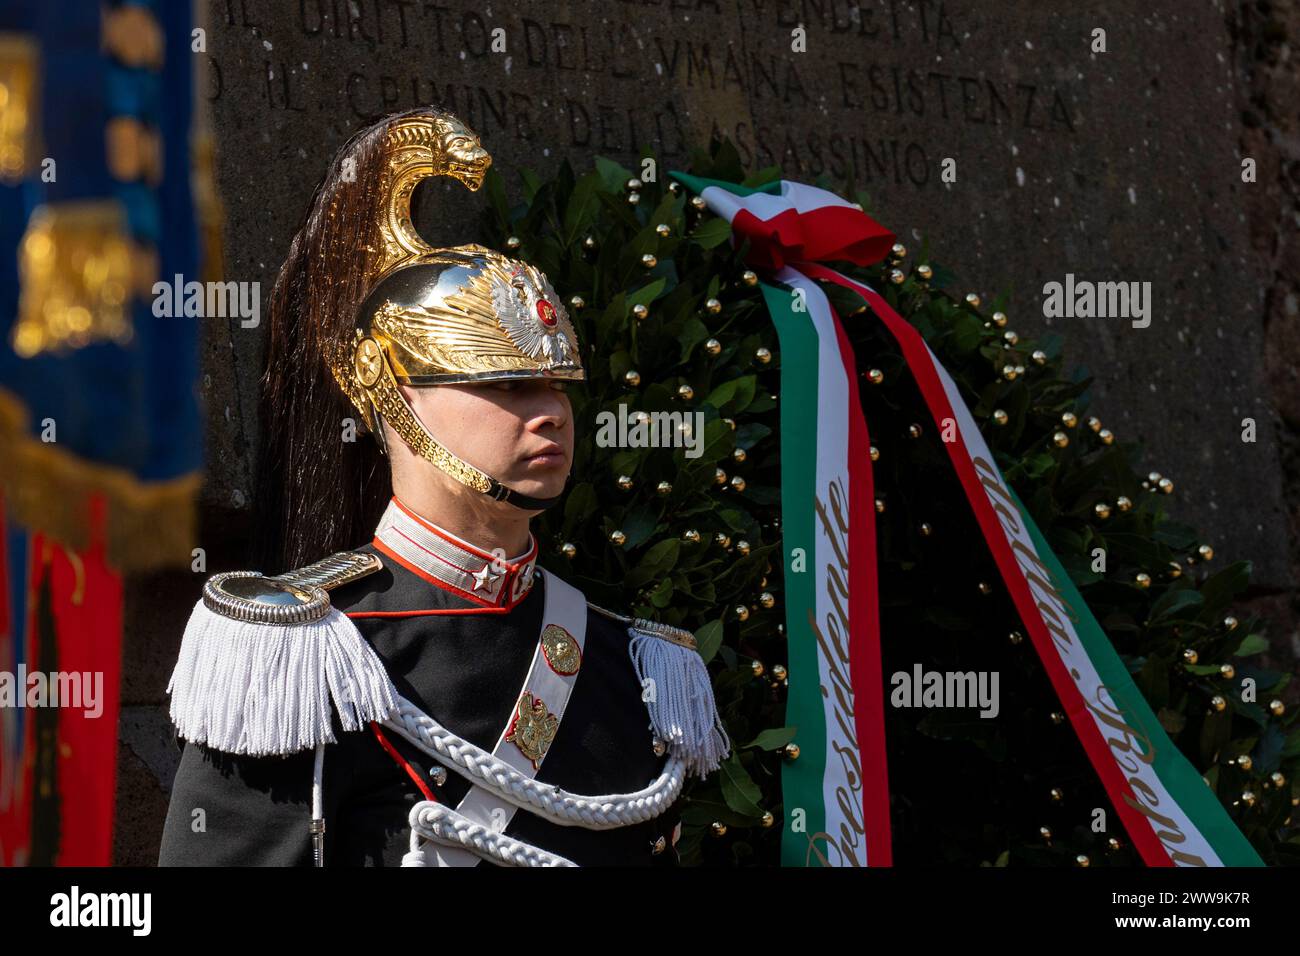 Members of the Corazzieri presidential guards, the Italian Corps of Cuirassiers, pay tribute to the graves of the victims of the Fosse Ardeatine massacre during the ceremony marking the 80th anniversary of the Fosse Ardeatine massacre. The Fosse Ardeatine mass killing of 335 civilians and political prisoners was carried out in this cave area in Rome on 24 March 1944 by German occupation troops during the Second World War as a reprisal for a partisan attack conducted on the previous day in central Rome against the SS Police Regiment Bozen. (Photo by Stefano Costantino/SOPA Images/Sipa USA) Stock Photo